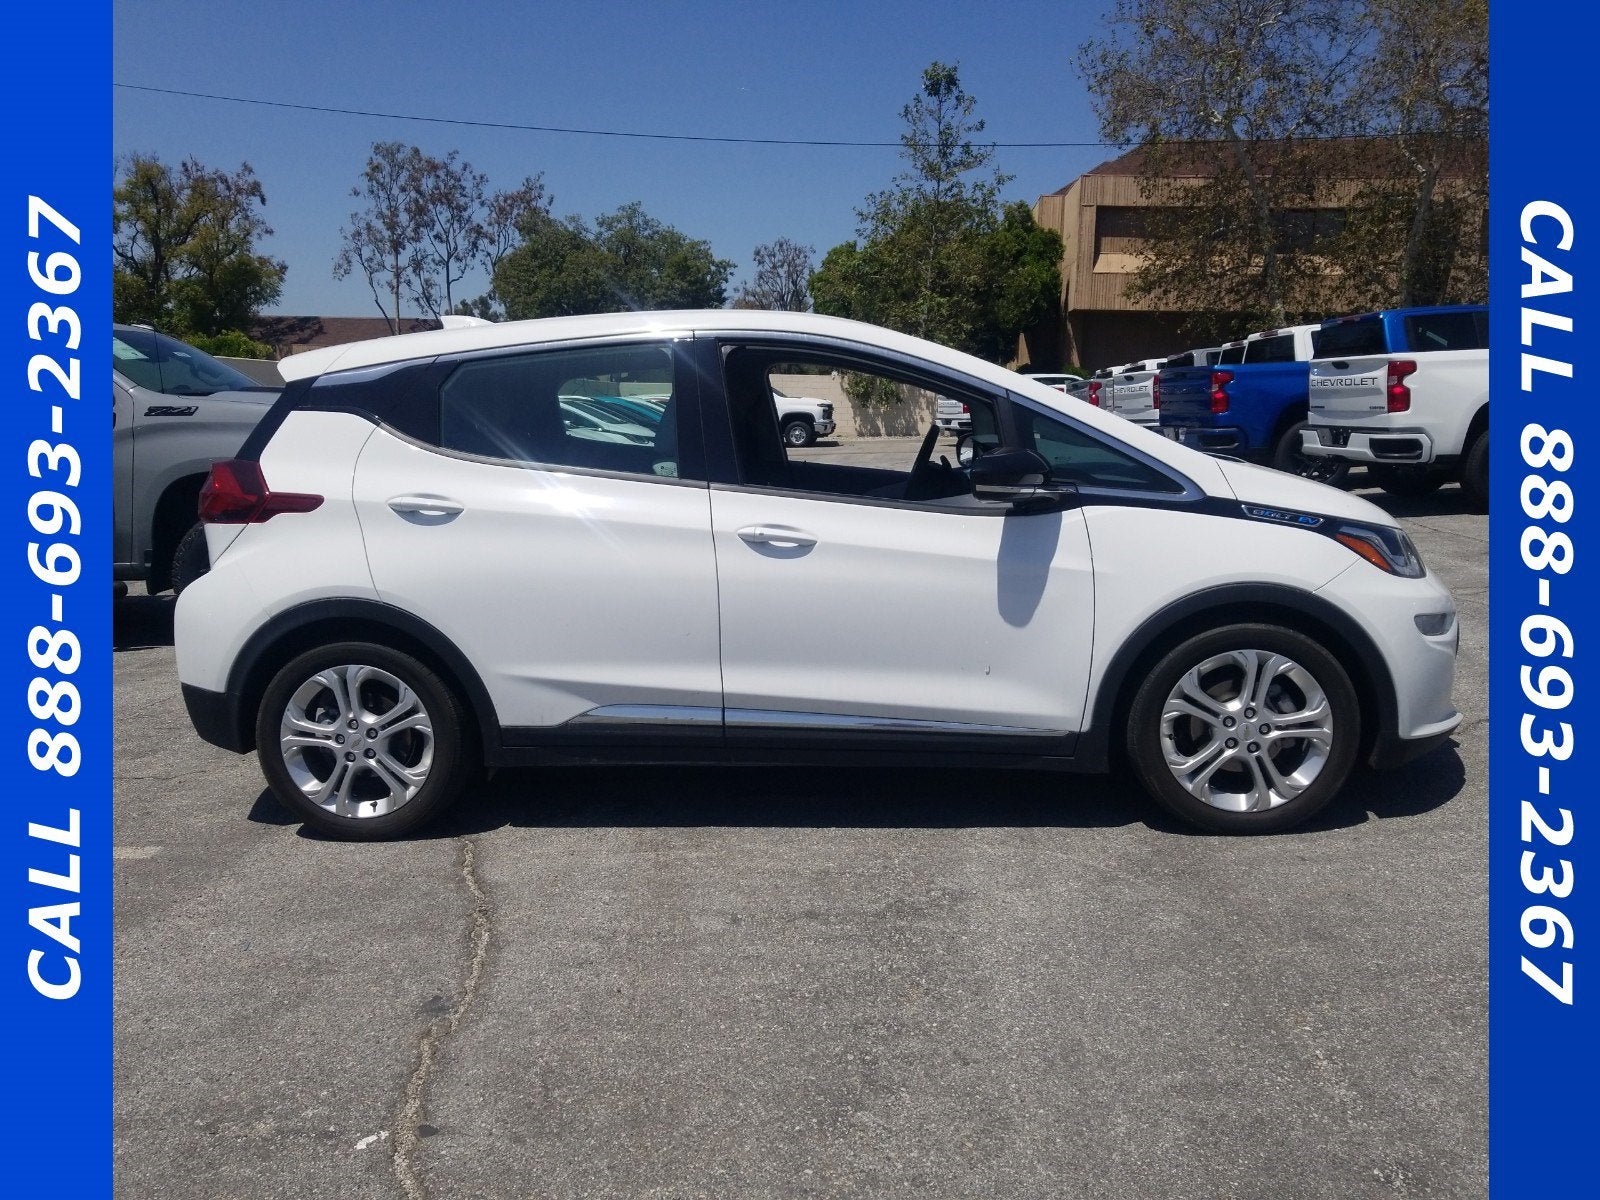 Used 2020 Chevrolet Bolt EV LT with VIN 1G1FW6S04L4150529 for sale in Upland, CA